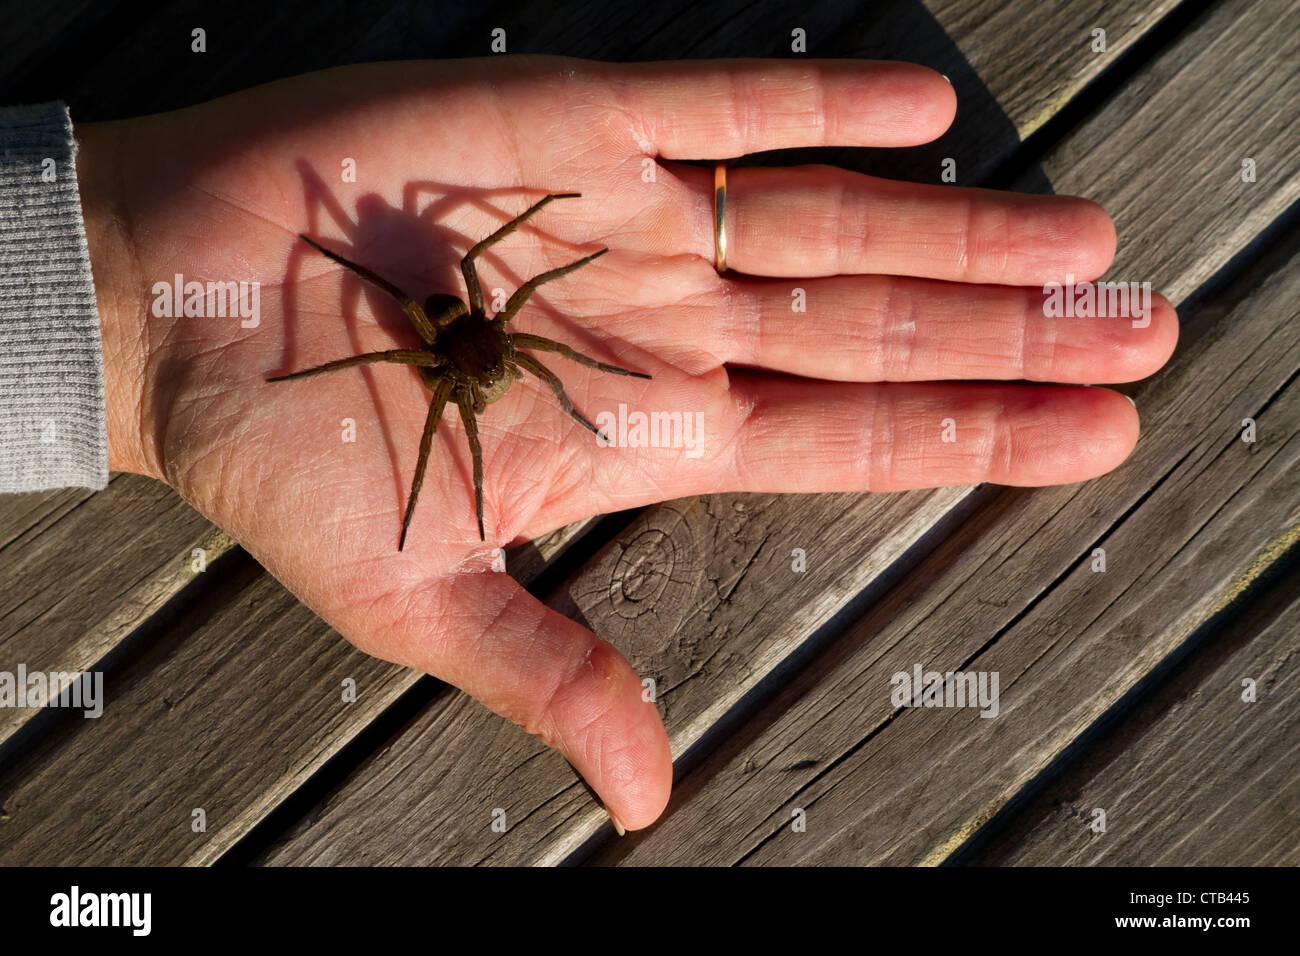 Fen Raft spider - Dolomedes plantarius, in the palm of a hand, carrying an egg sac. Stock Photo